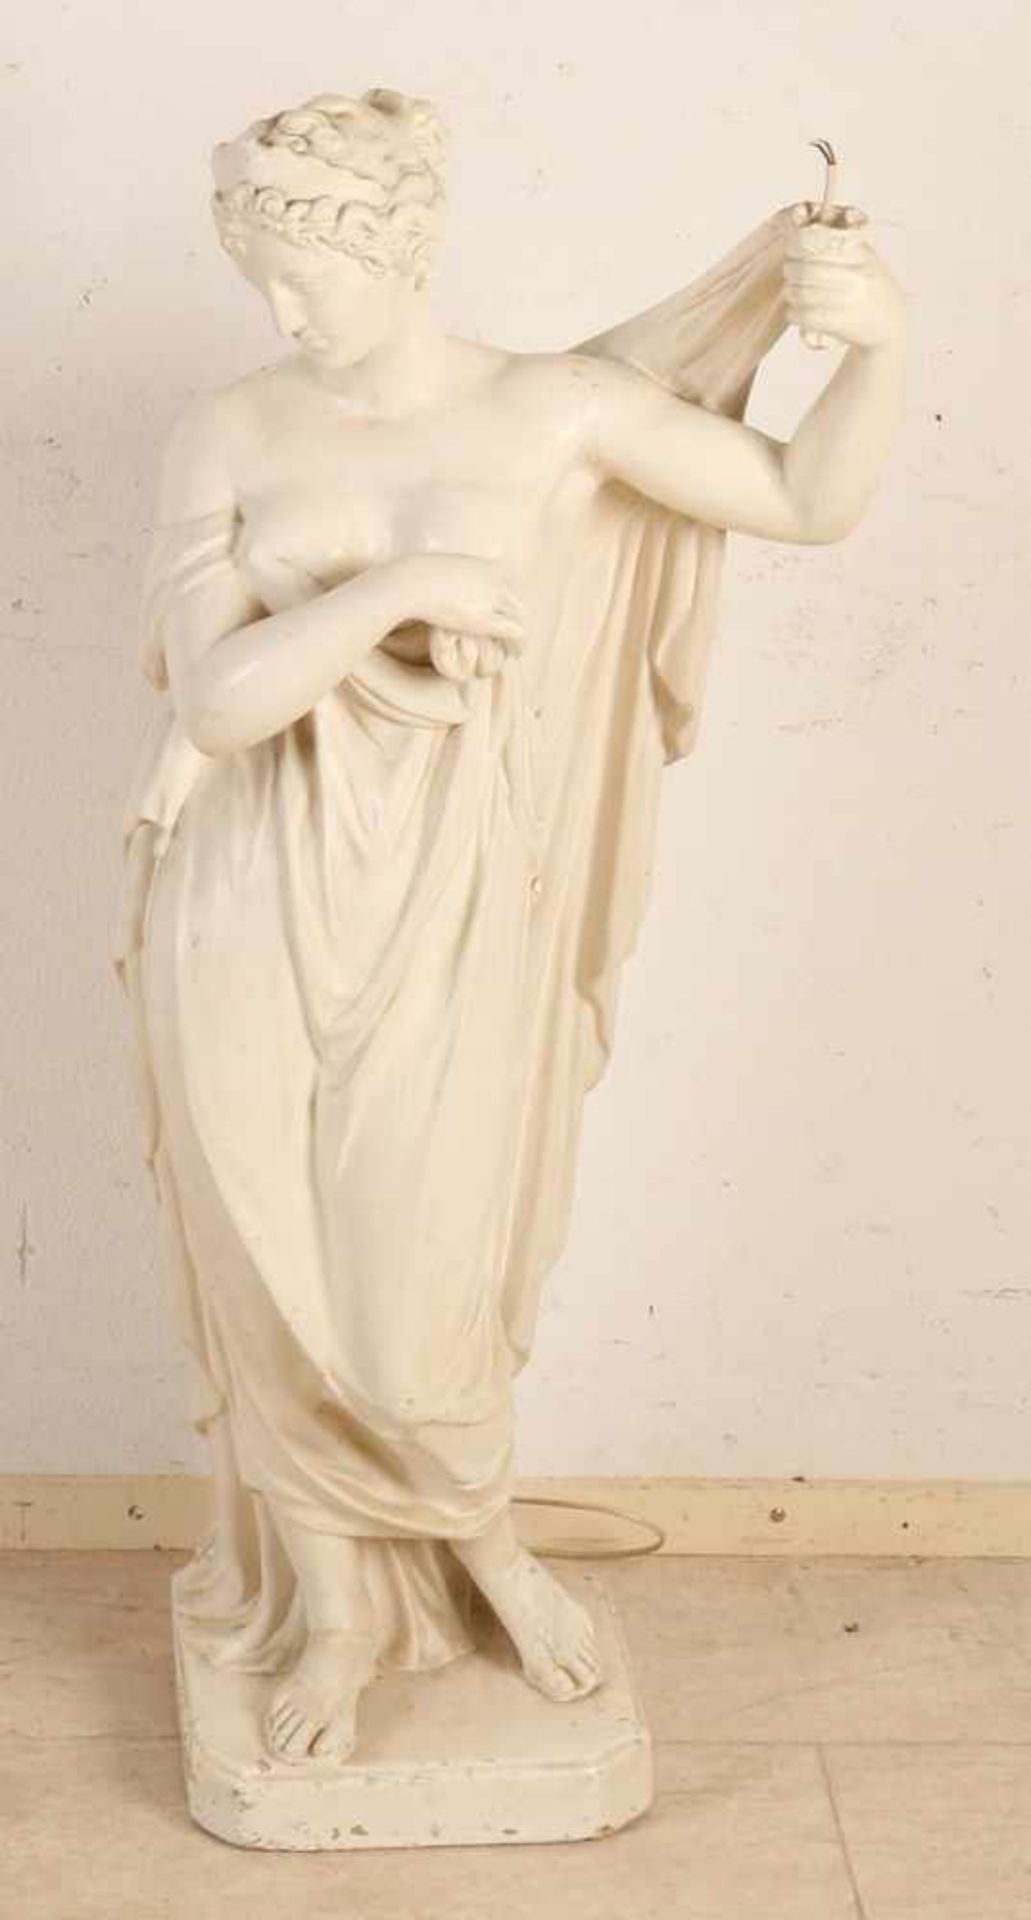 Big antique plaster Fig. Greek woman. Was cap. Approximately 1900. Upon hand damaged. Dimensions: